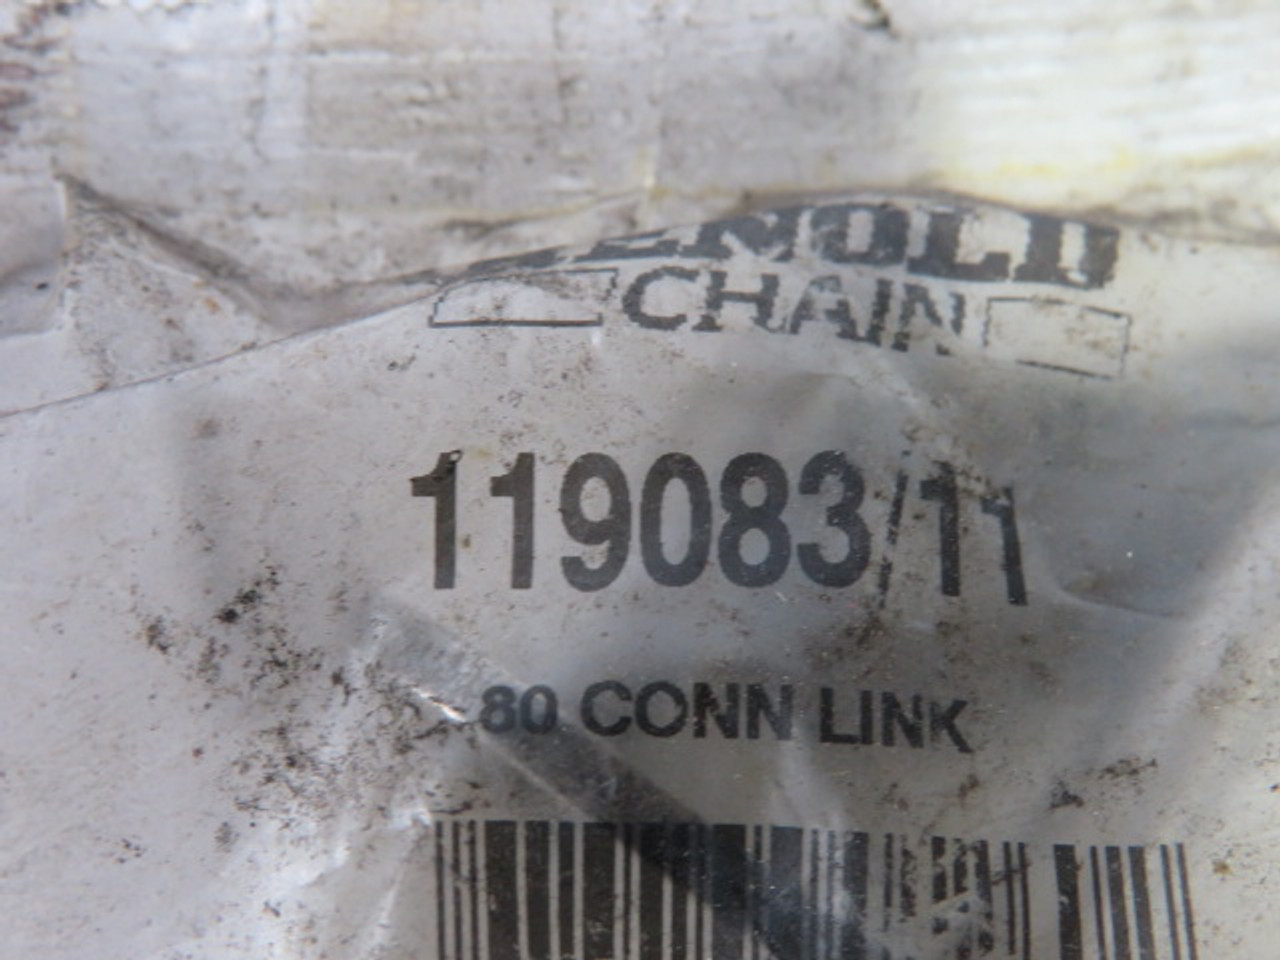 Renold Chain 119083/11 80 Connecting Chain Link ! NWB !